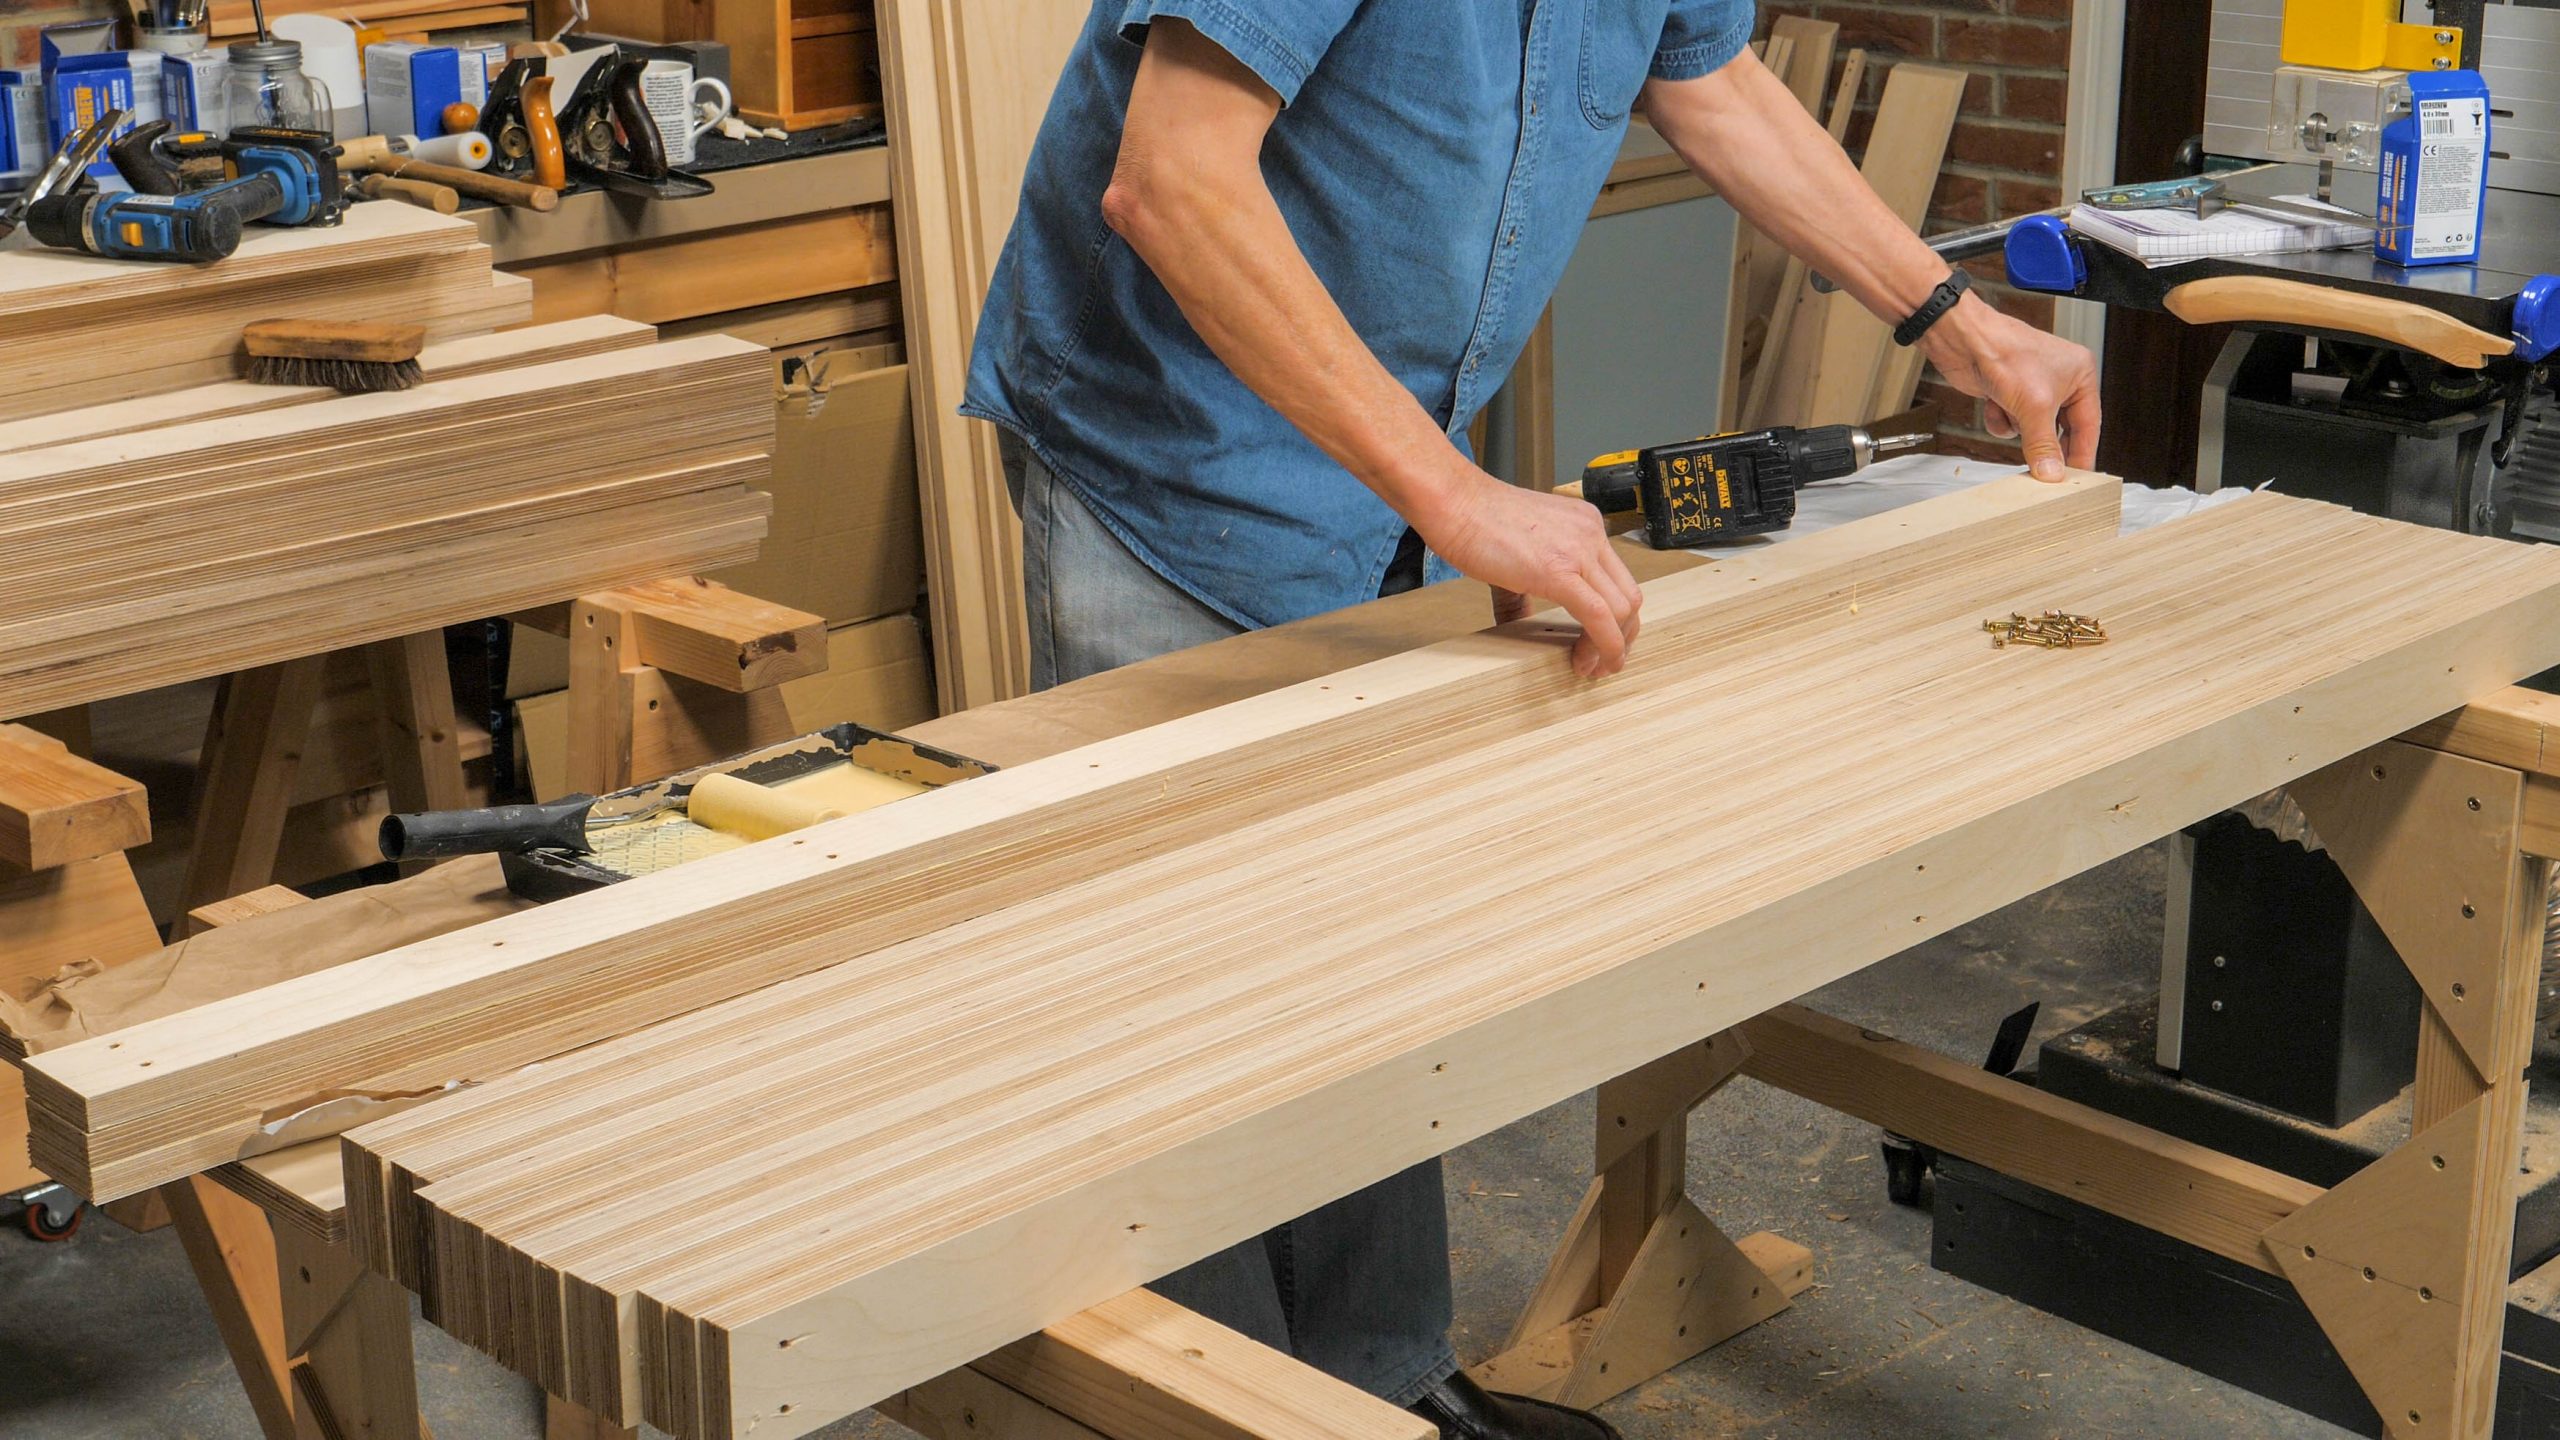 Threaded rod and epoxy: A versatile option for leg joinery - FineWoodworking